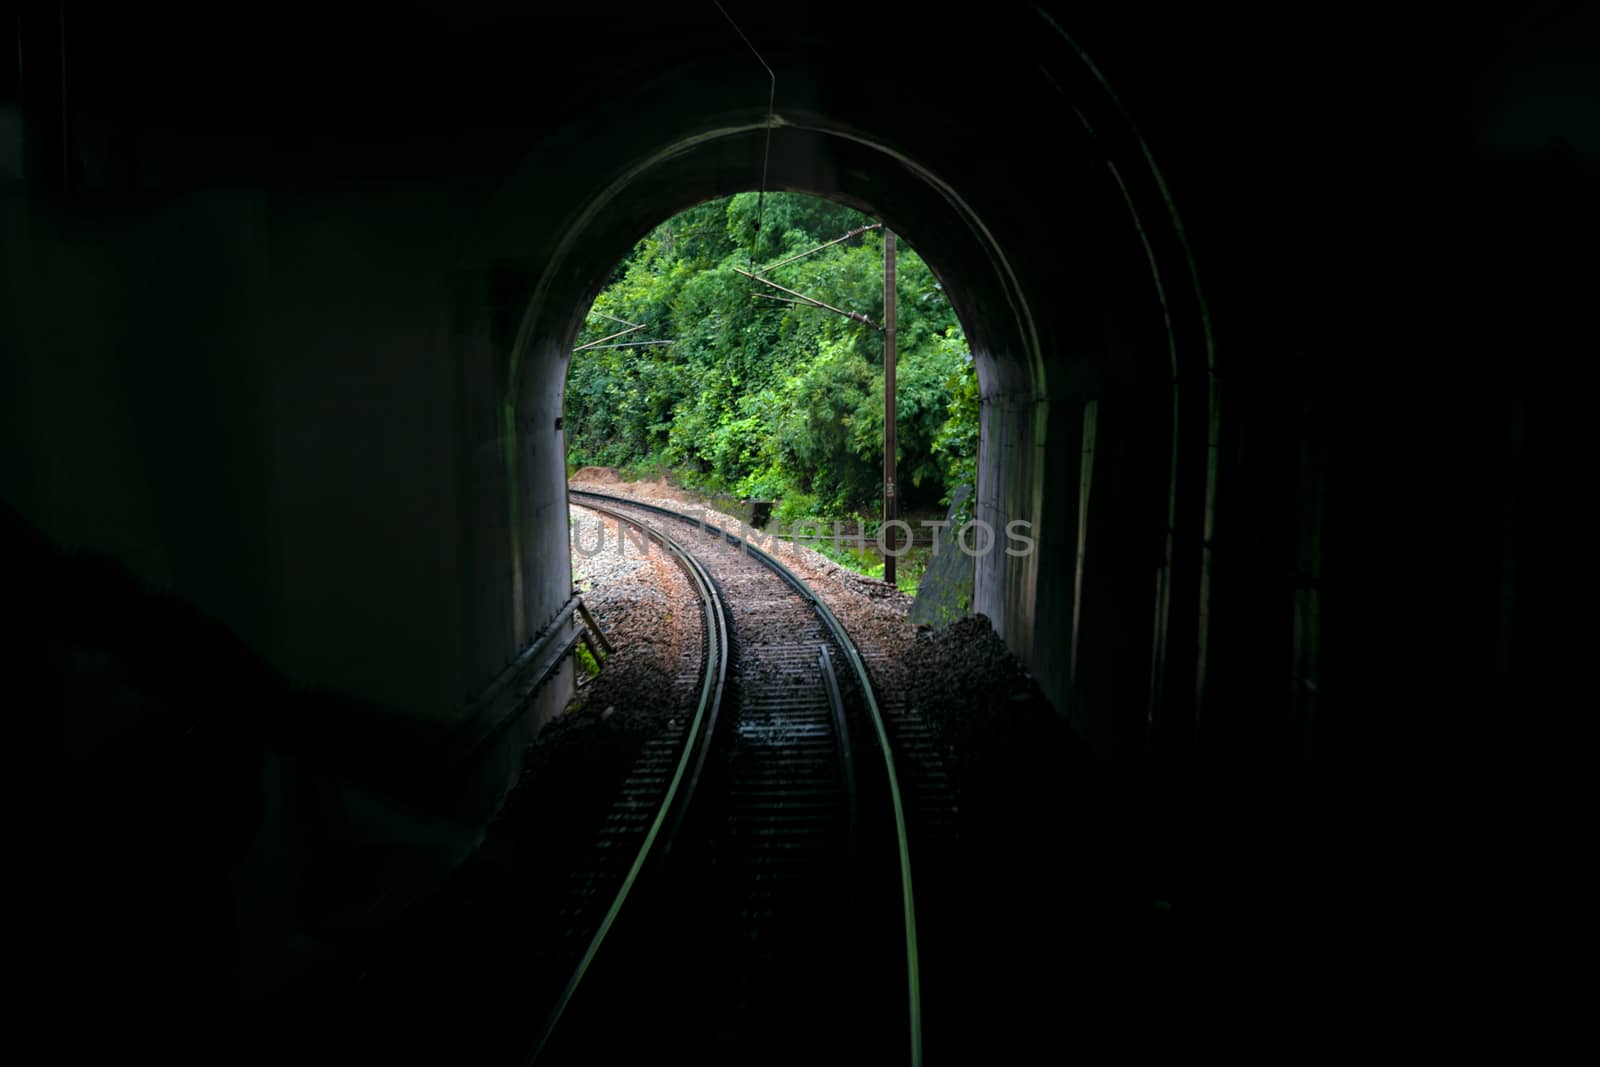 Image taken from vistadome tourist coach of a tunnel portal with railway line. by lalam